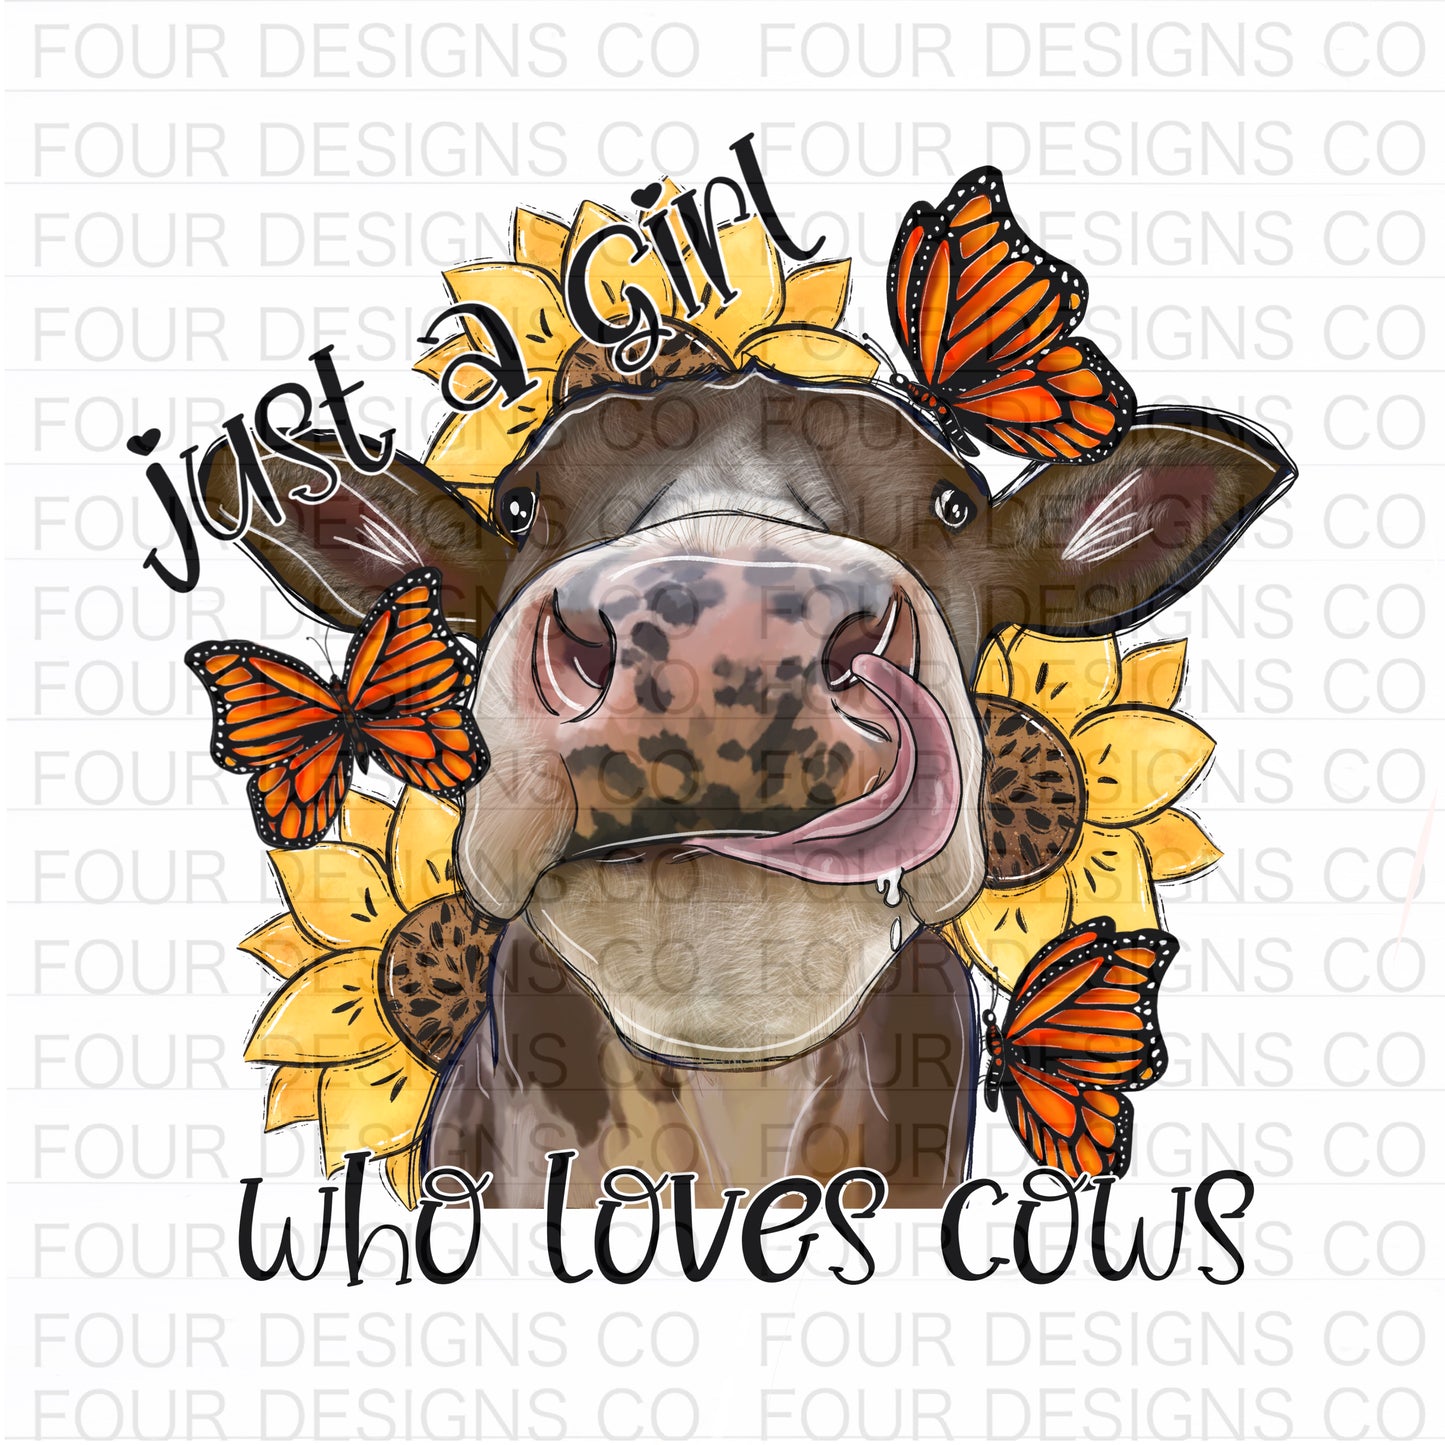 Just a girl who loves cows